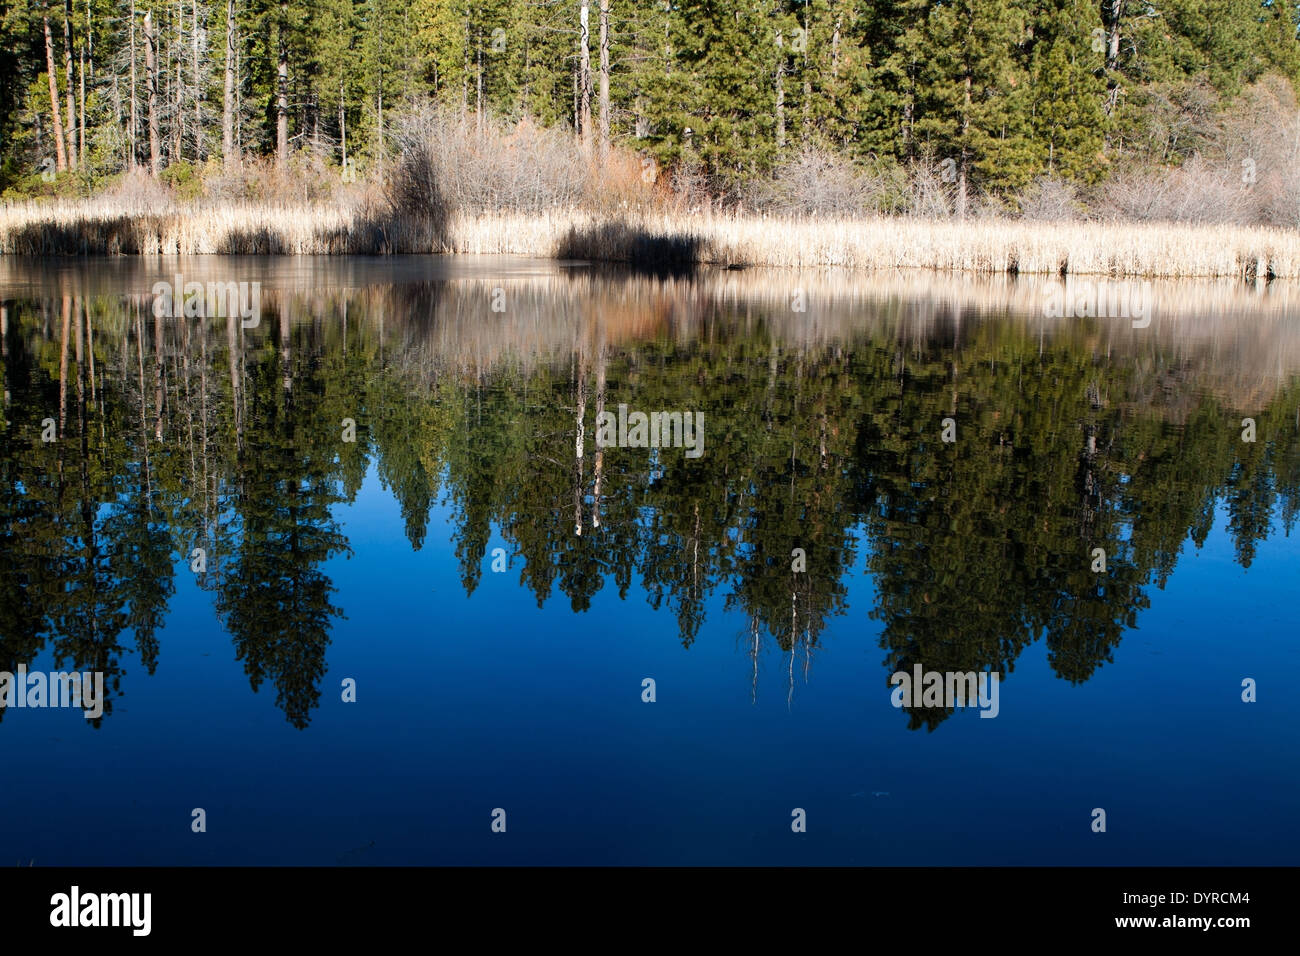 A forest of pine trees reflected in a pond on a bright, sunny day Stock Photo